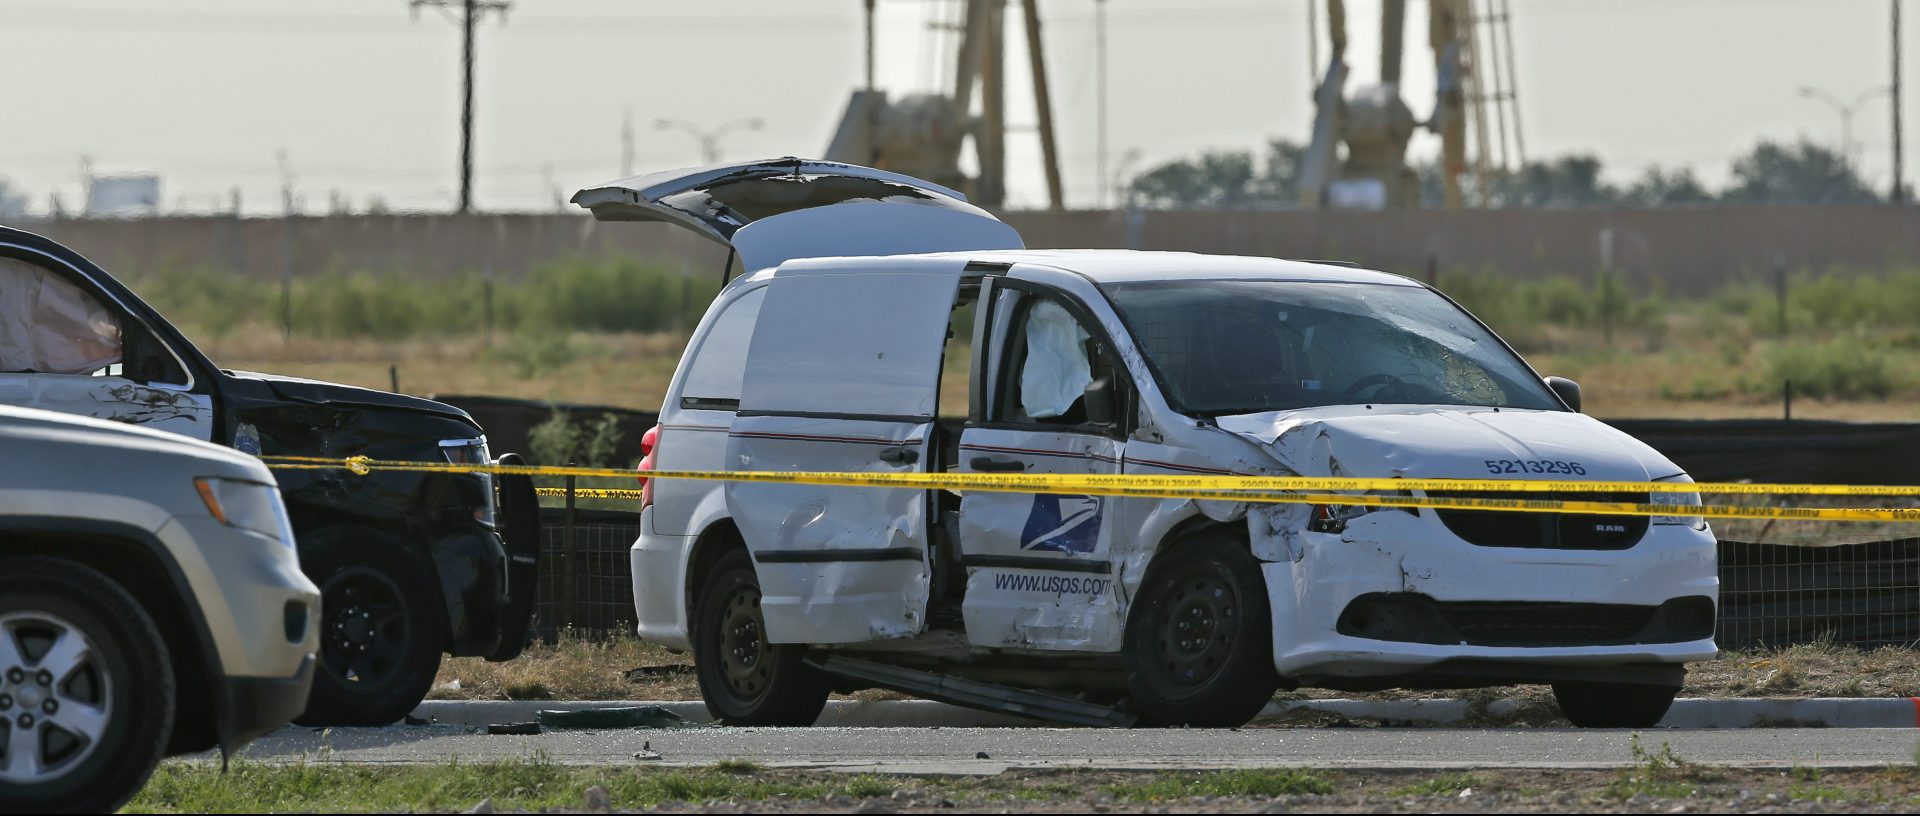 A U.S. Mail vehicle, right, which was involved in Saturday's shooting, is pictured outside the Cinergy entertainment center Sunday, Sept. 1, 2019, in Odessa, Texas. The death toll in the West Texas shooting rampage increased Sunday as authorities investigated why a man stopped by state troopers for failing to signal a left turn opened fire on them and fled, shooting over a dozen people as he drove before being killed by officers outside a movie theater. A police vehicle is partially blocked at left.